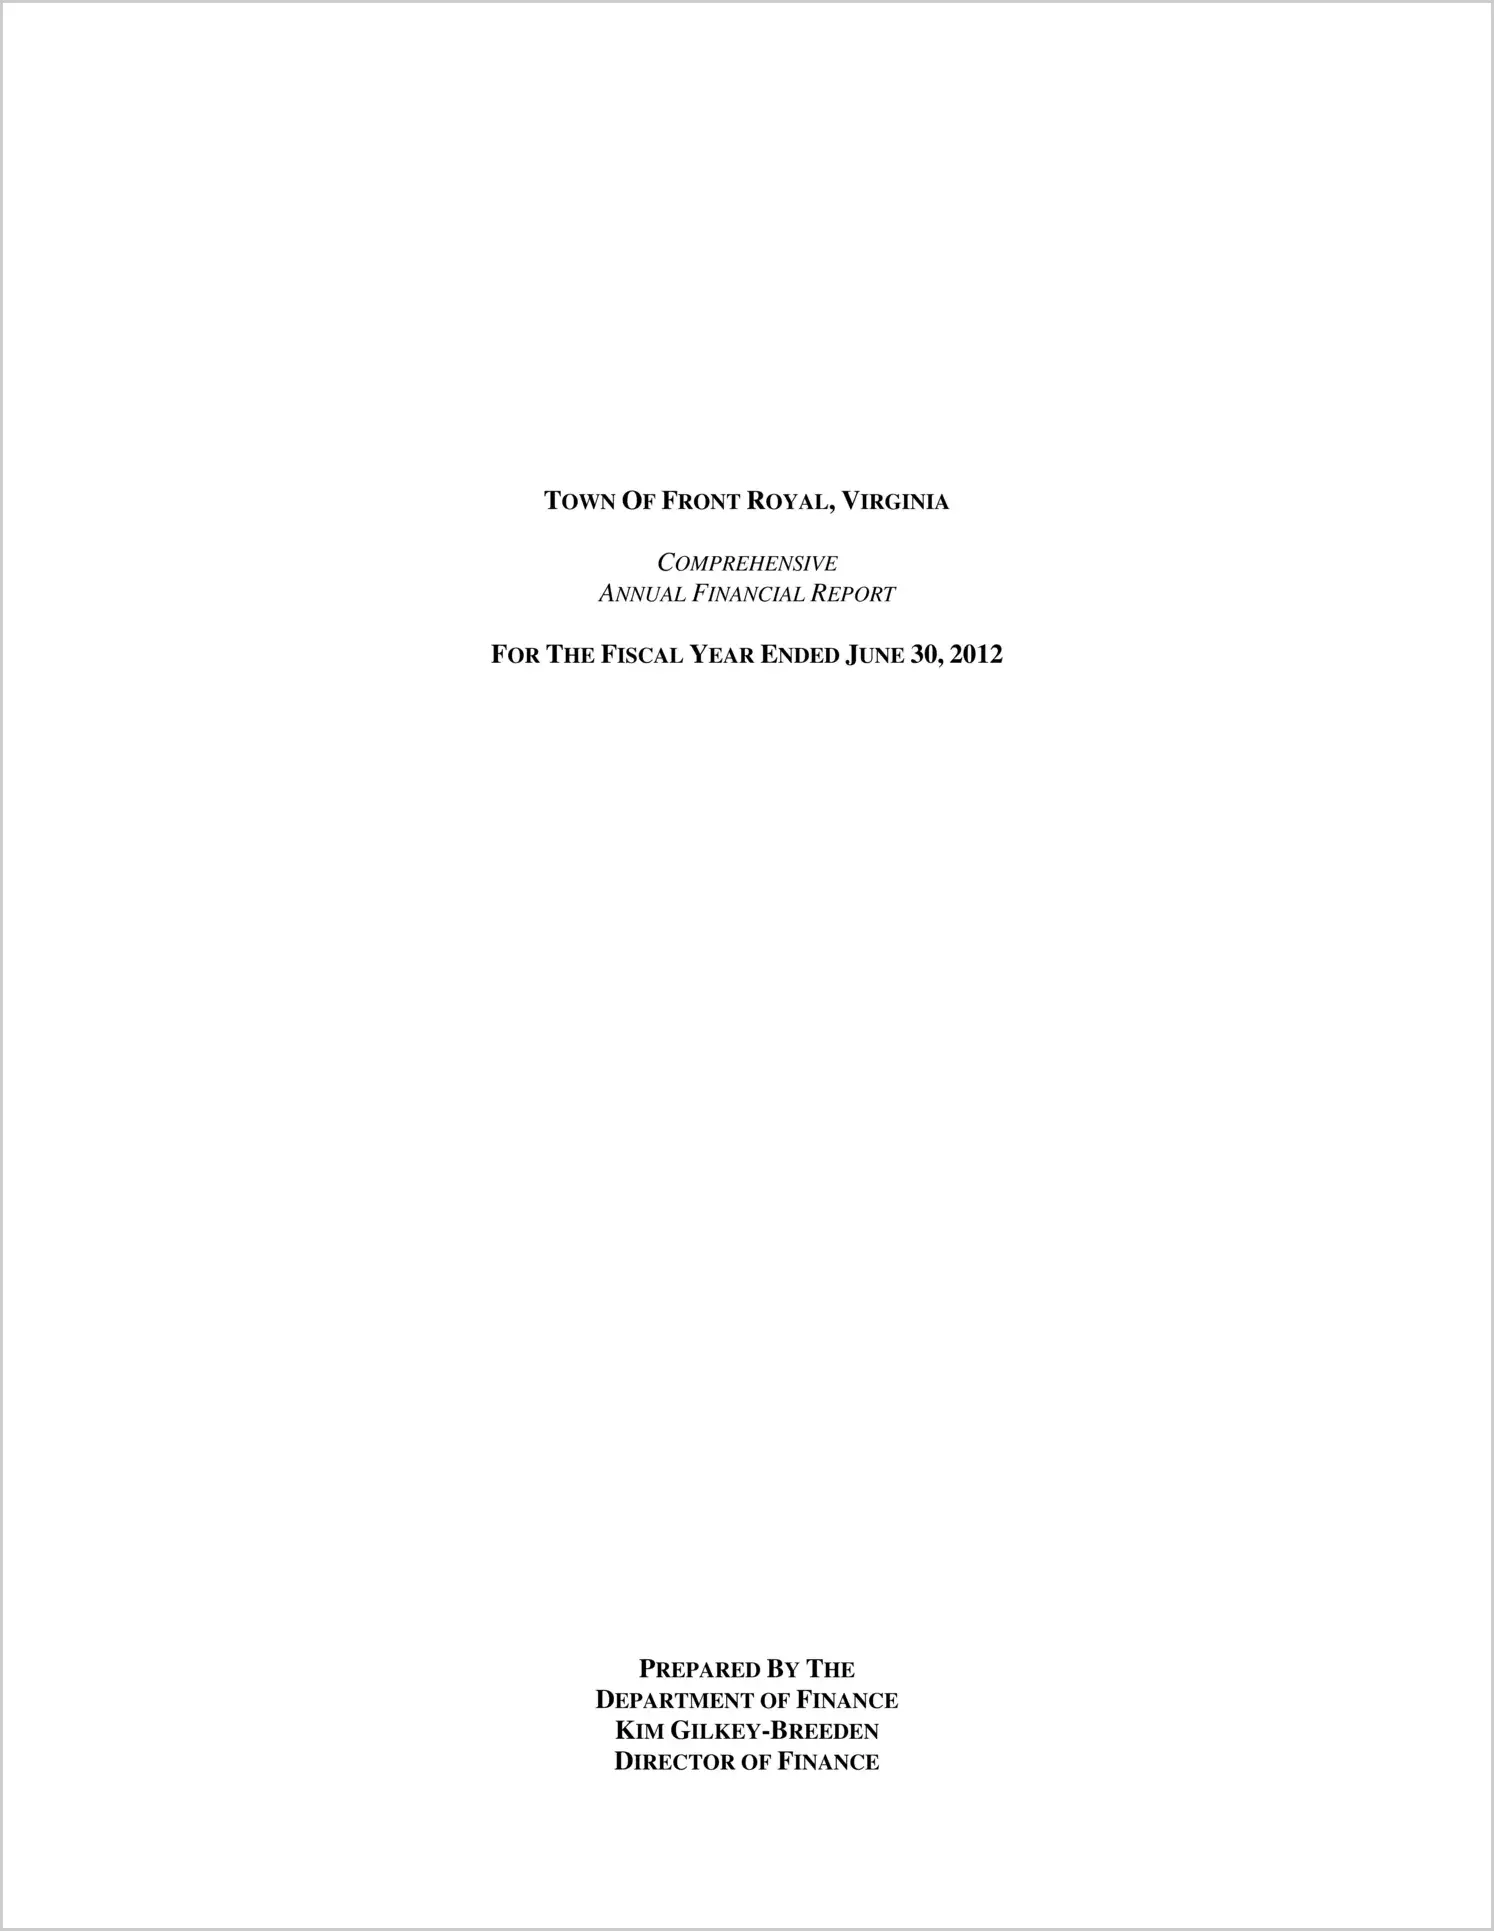 2012 Annual Financial Report for Town of Front Royal